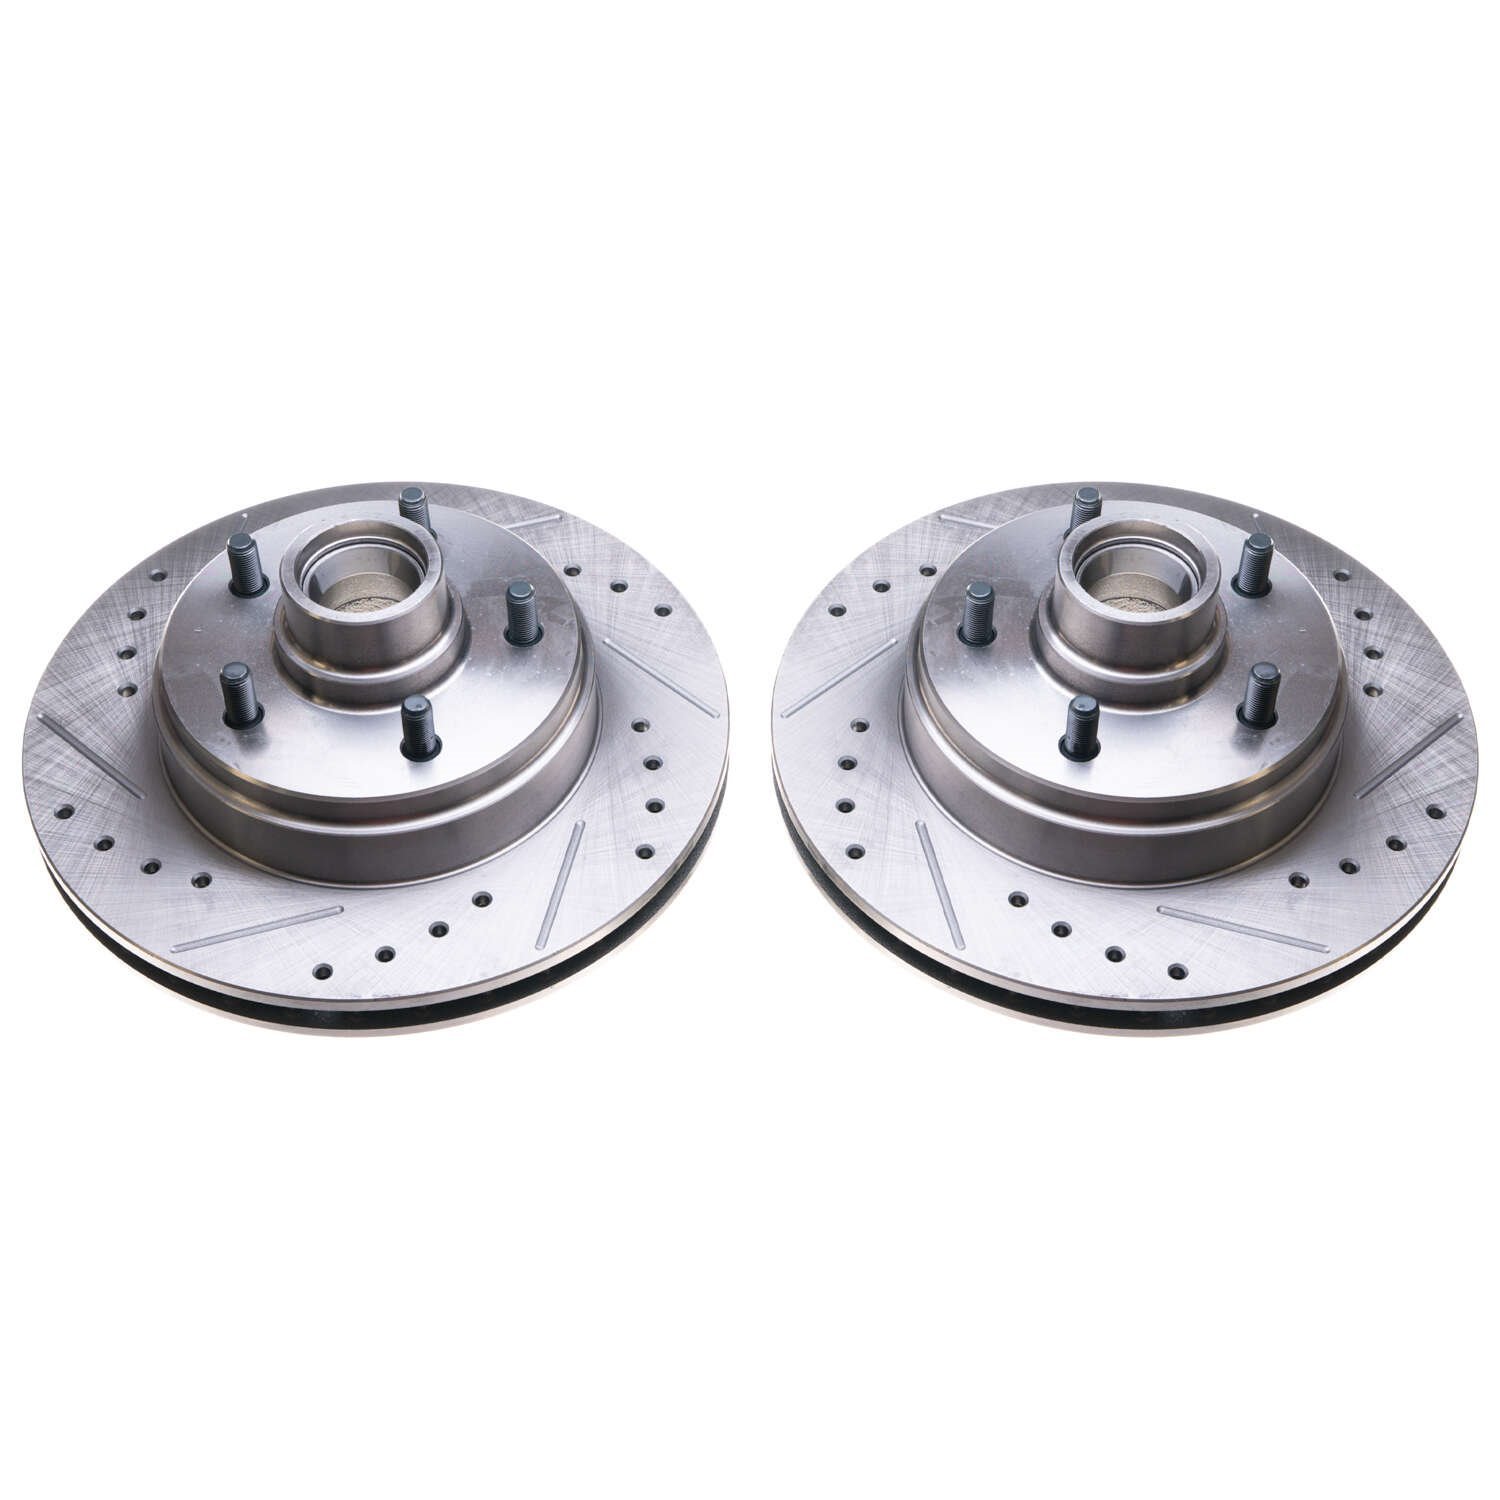 Drilled and Slotted Brake Rotors Fits Select 1977-1993